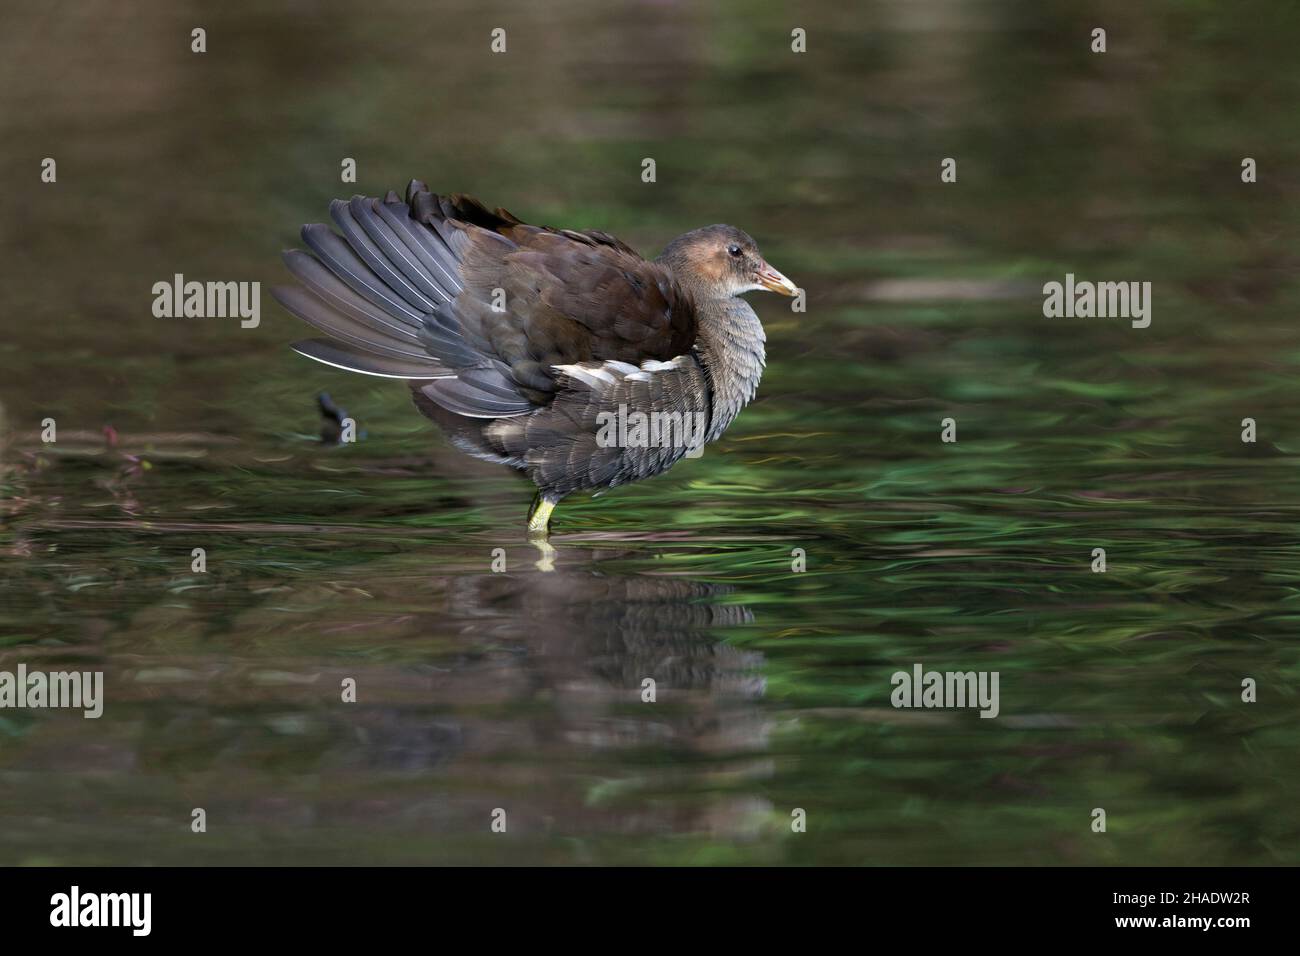 Moorhen, (Gallinula chloropus) young bird in stream, ruffling its wing feathers, Lower Saxony, Germany Stock Photo